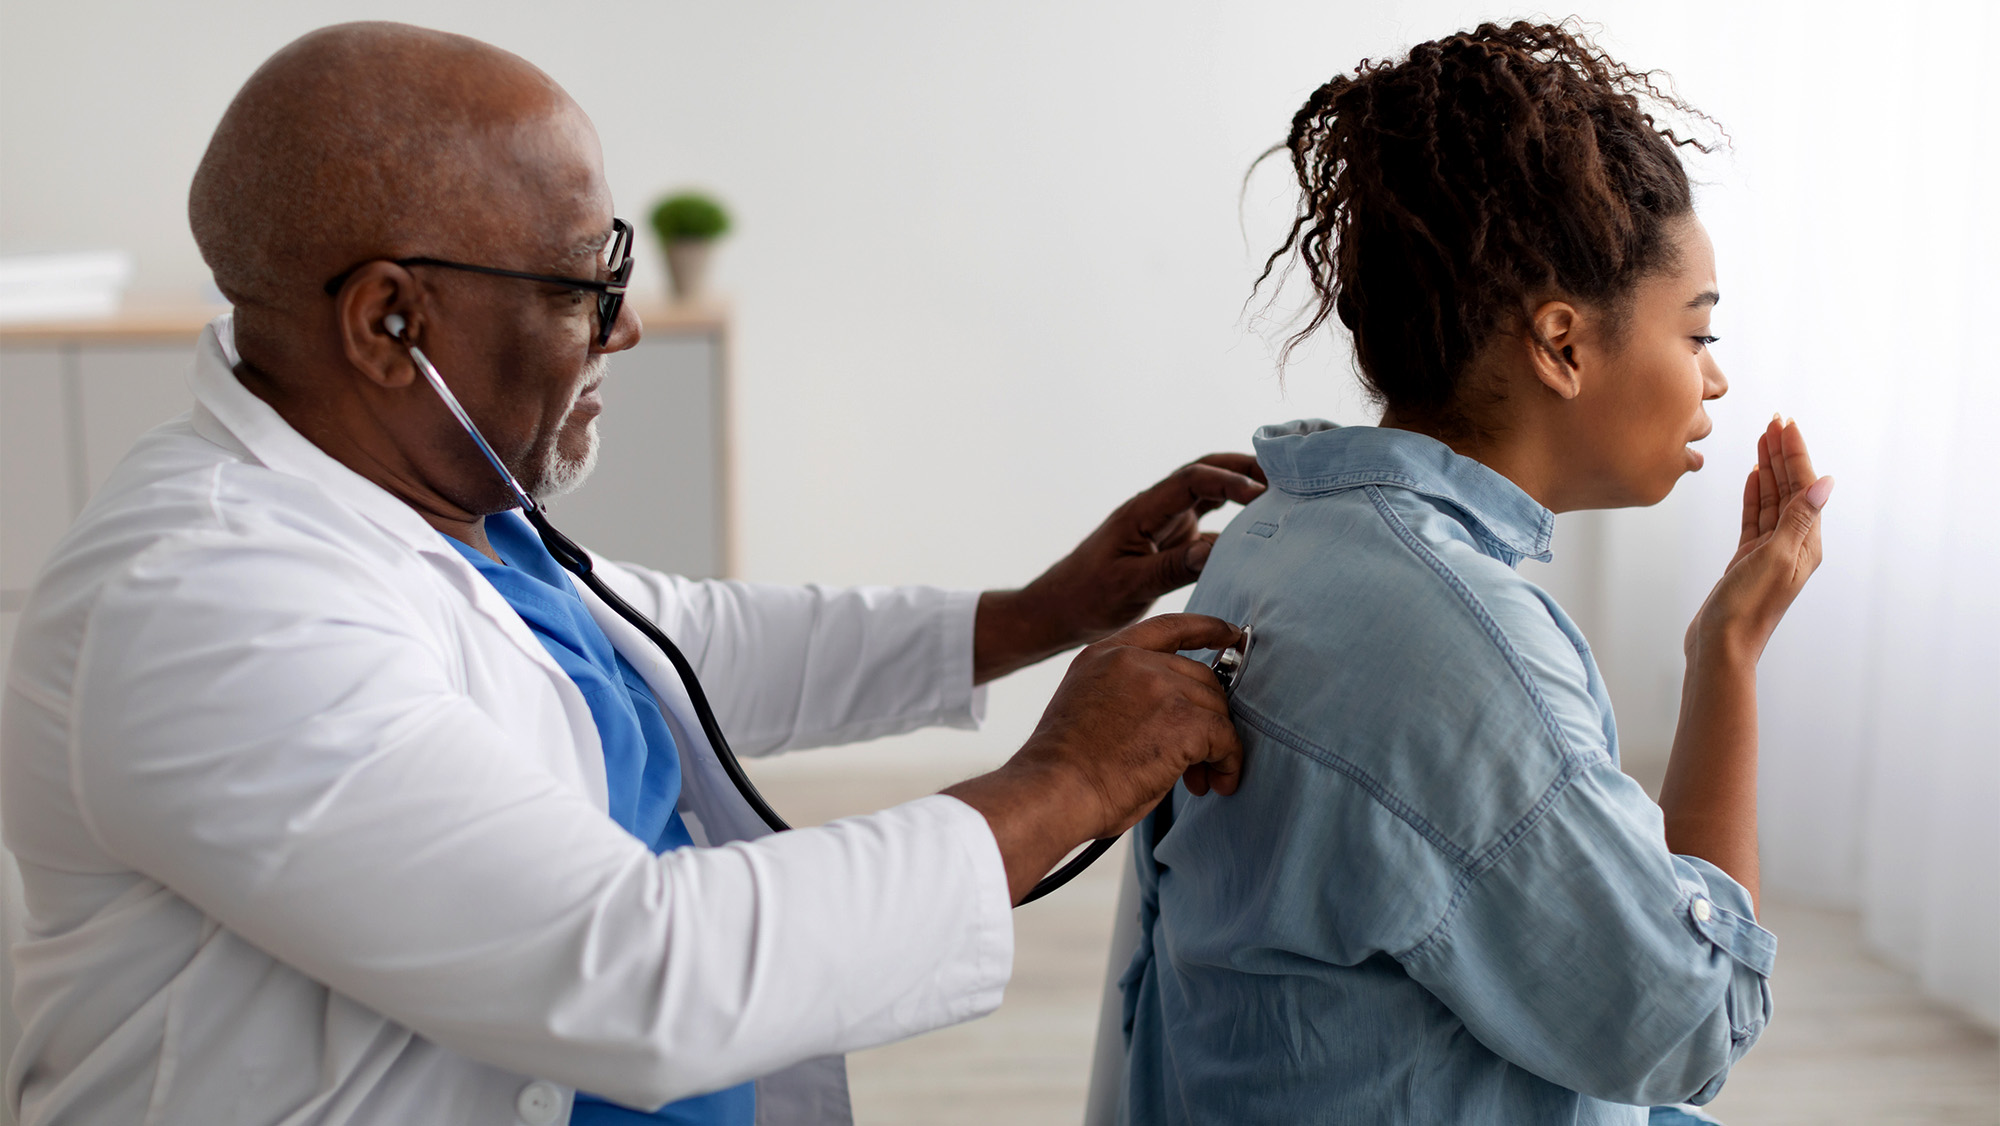 A doctor holds a stethoscope to a patient's back as she coughs